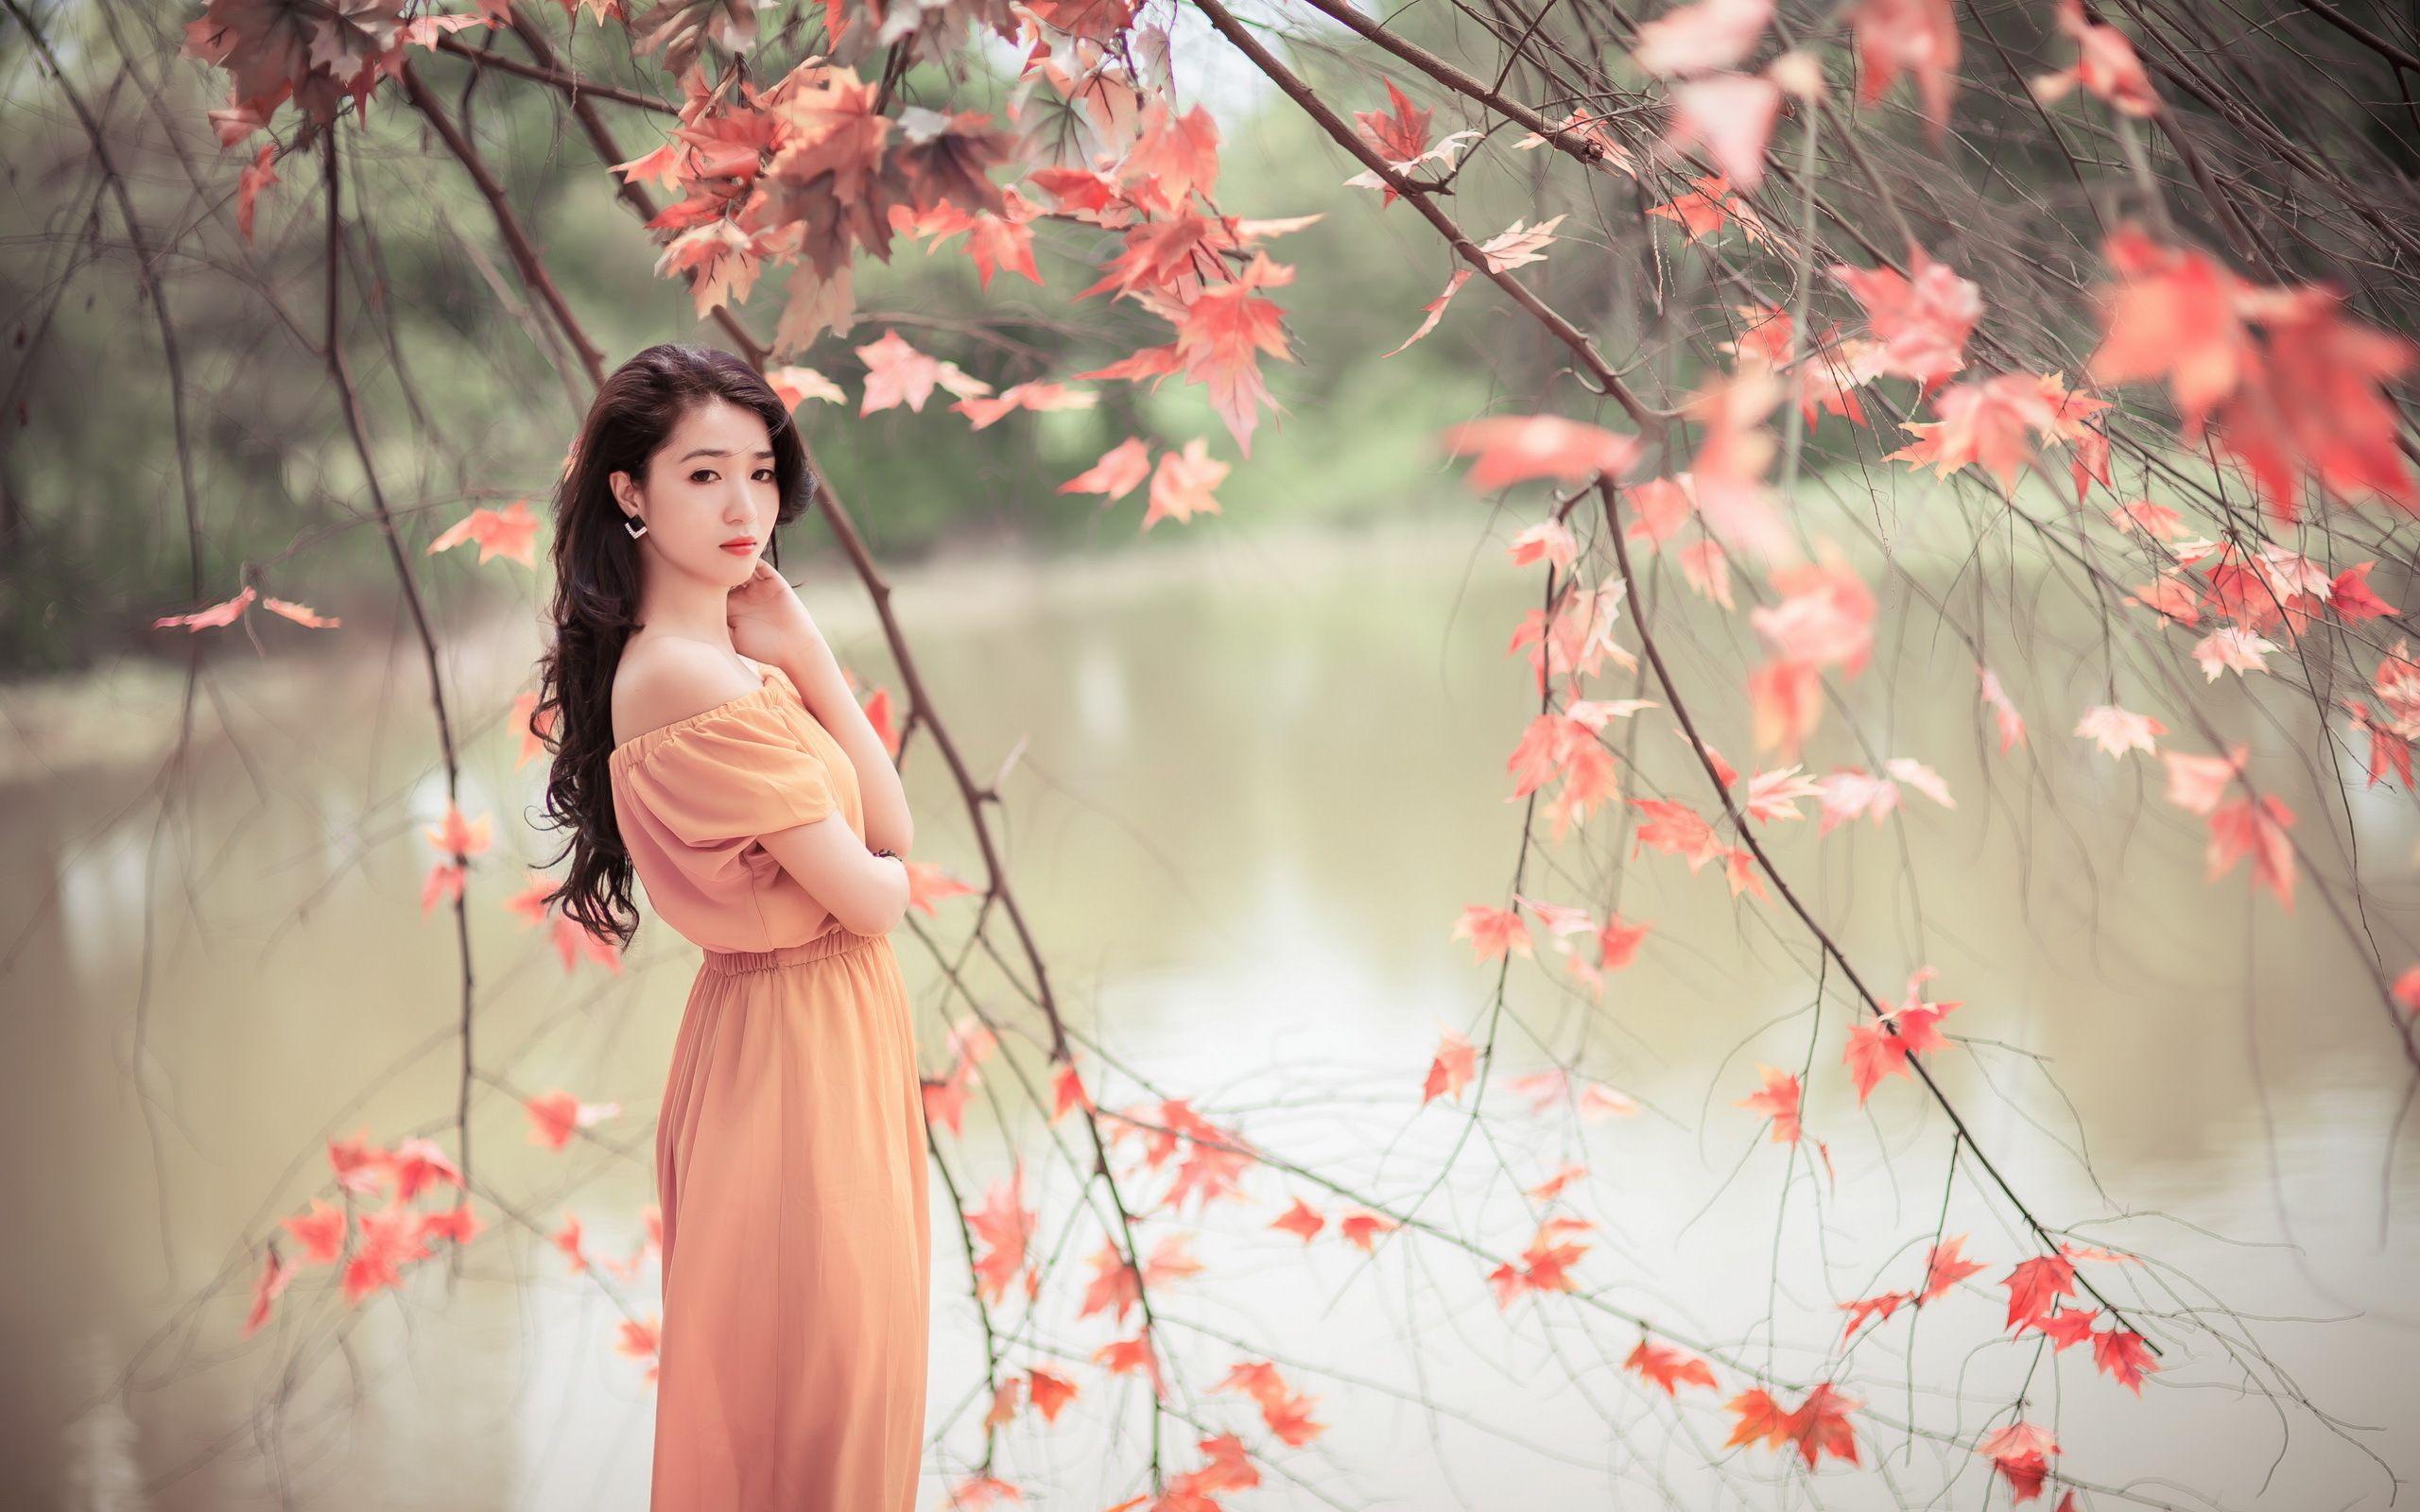 Ancient Chinese Girl Wallpaper Free Ancient Chinese Girl